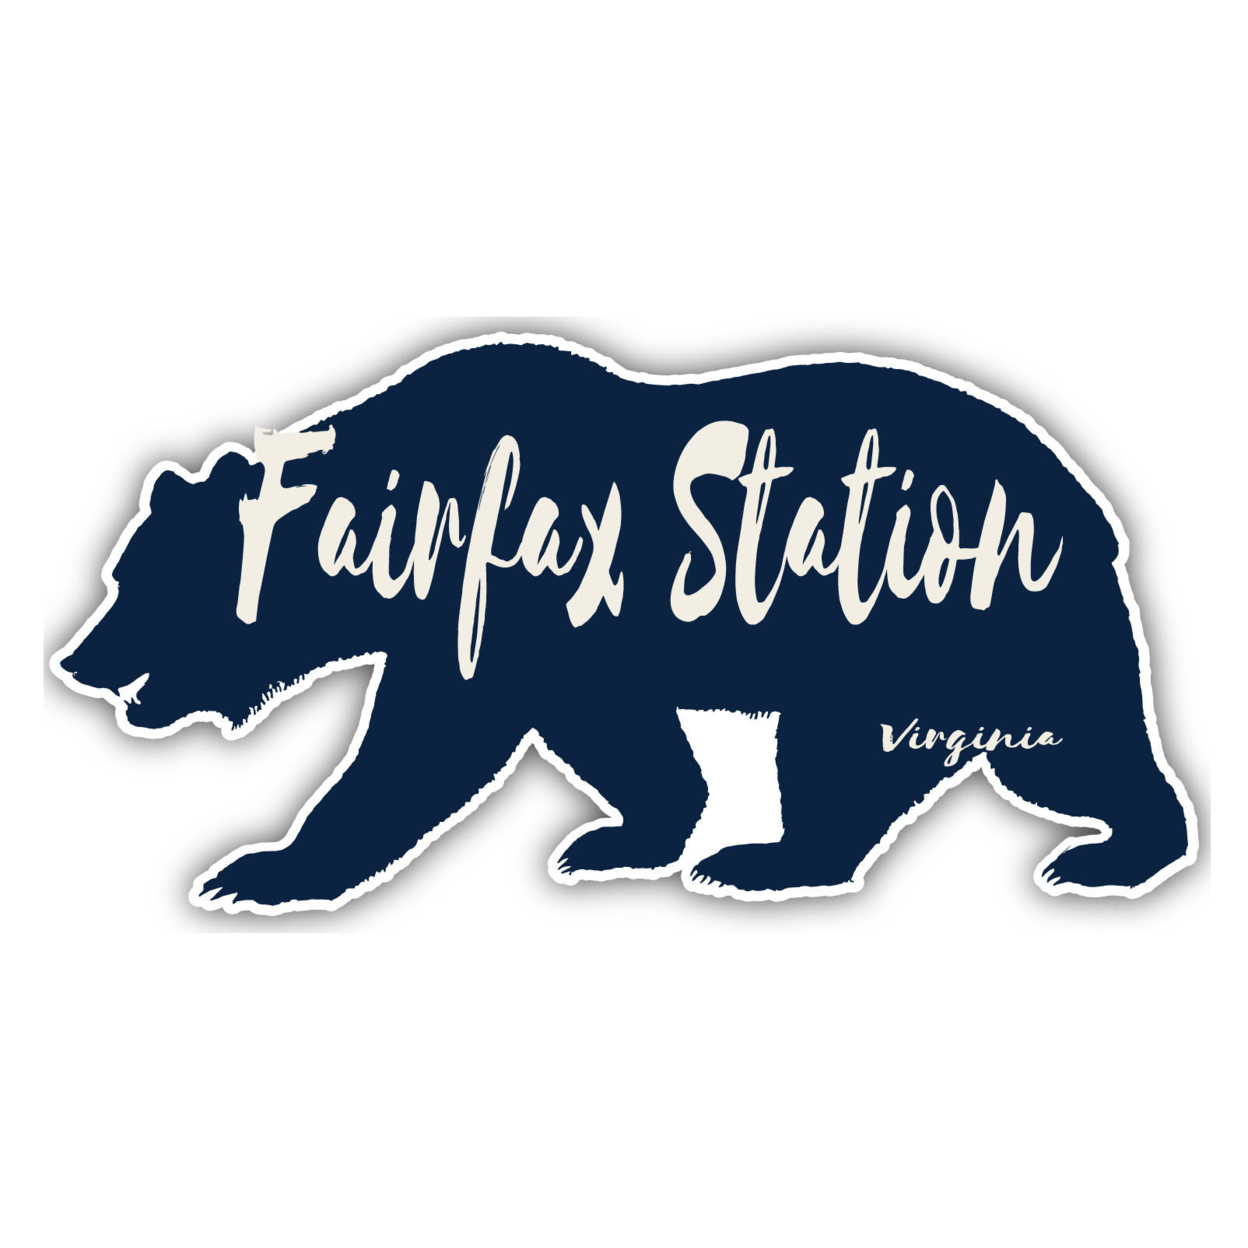 Fairfax Station Virginia Souvenir Decorative Stickers (Choose Theme And Size) - 4-Pack, 2-Inch, Bear